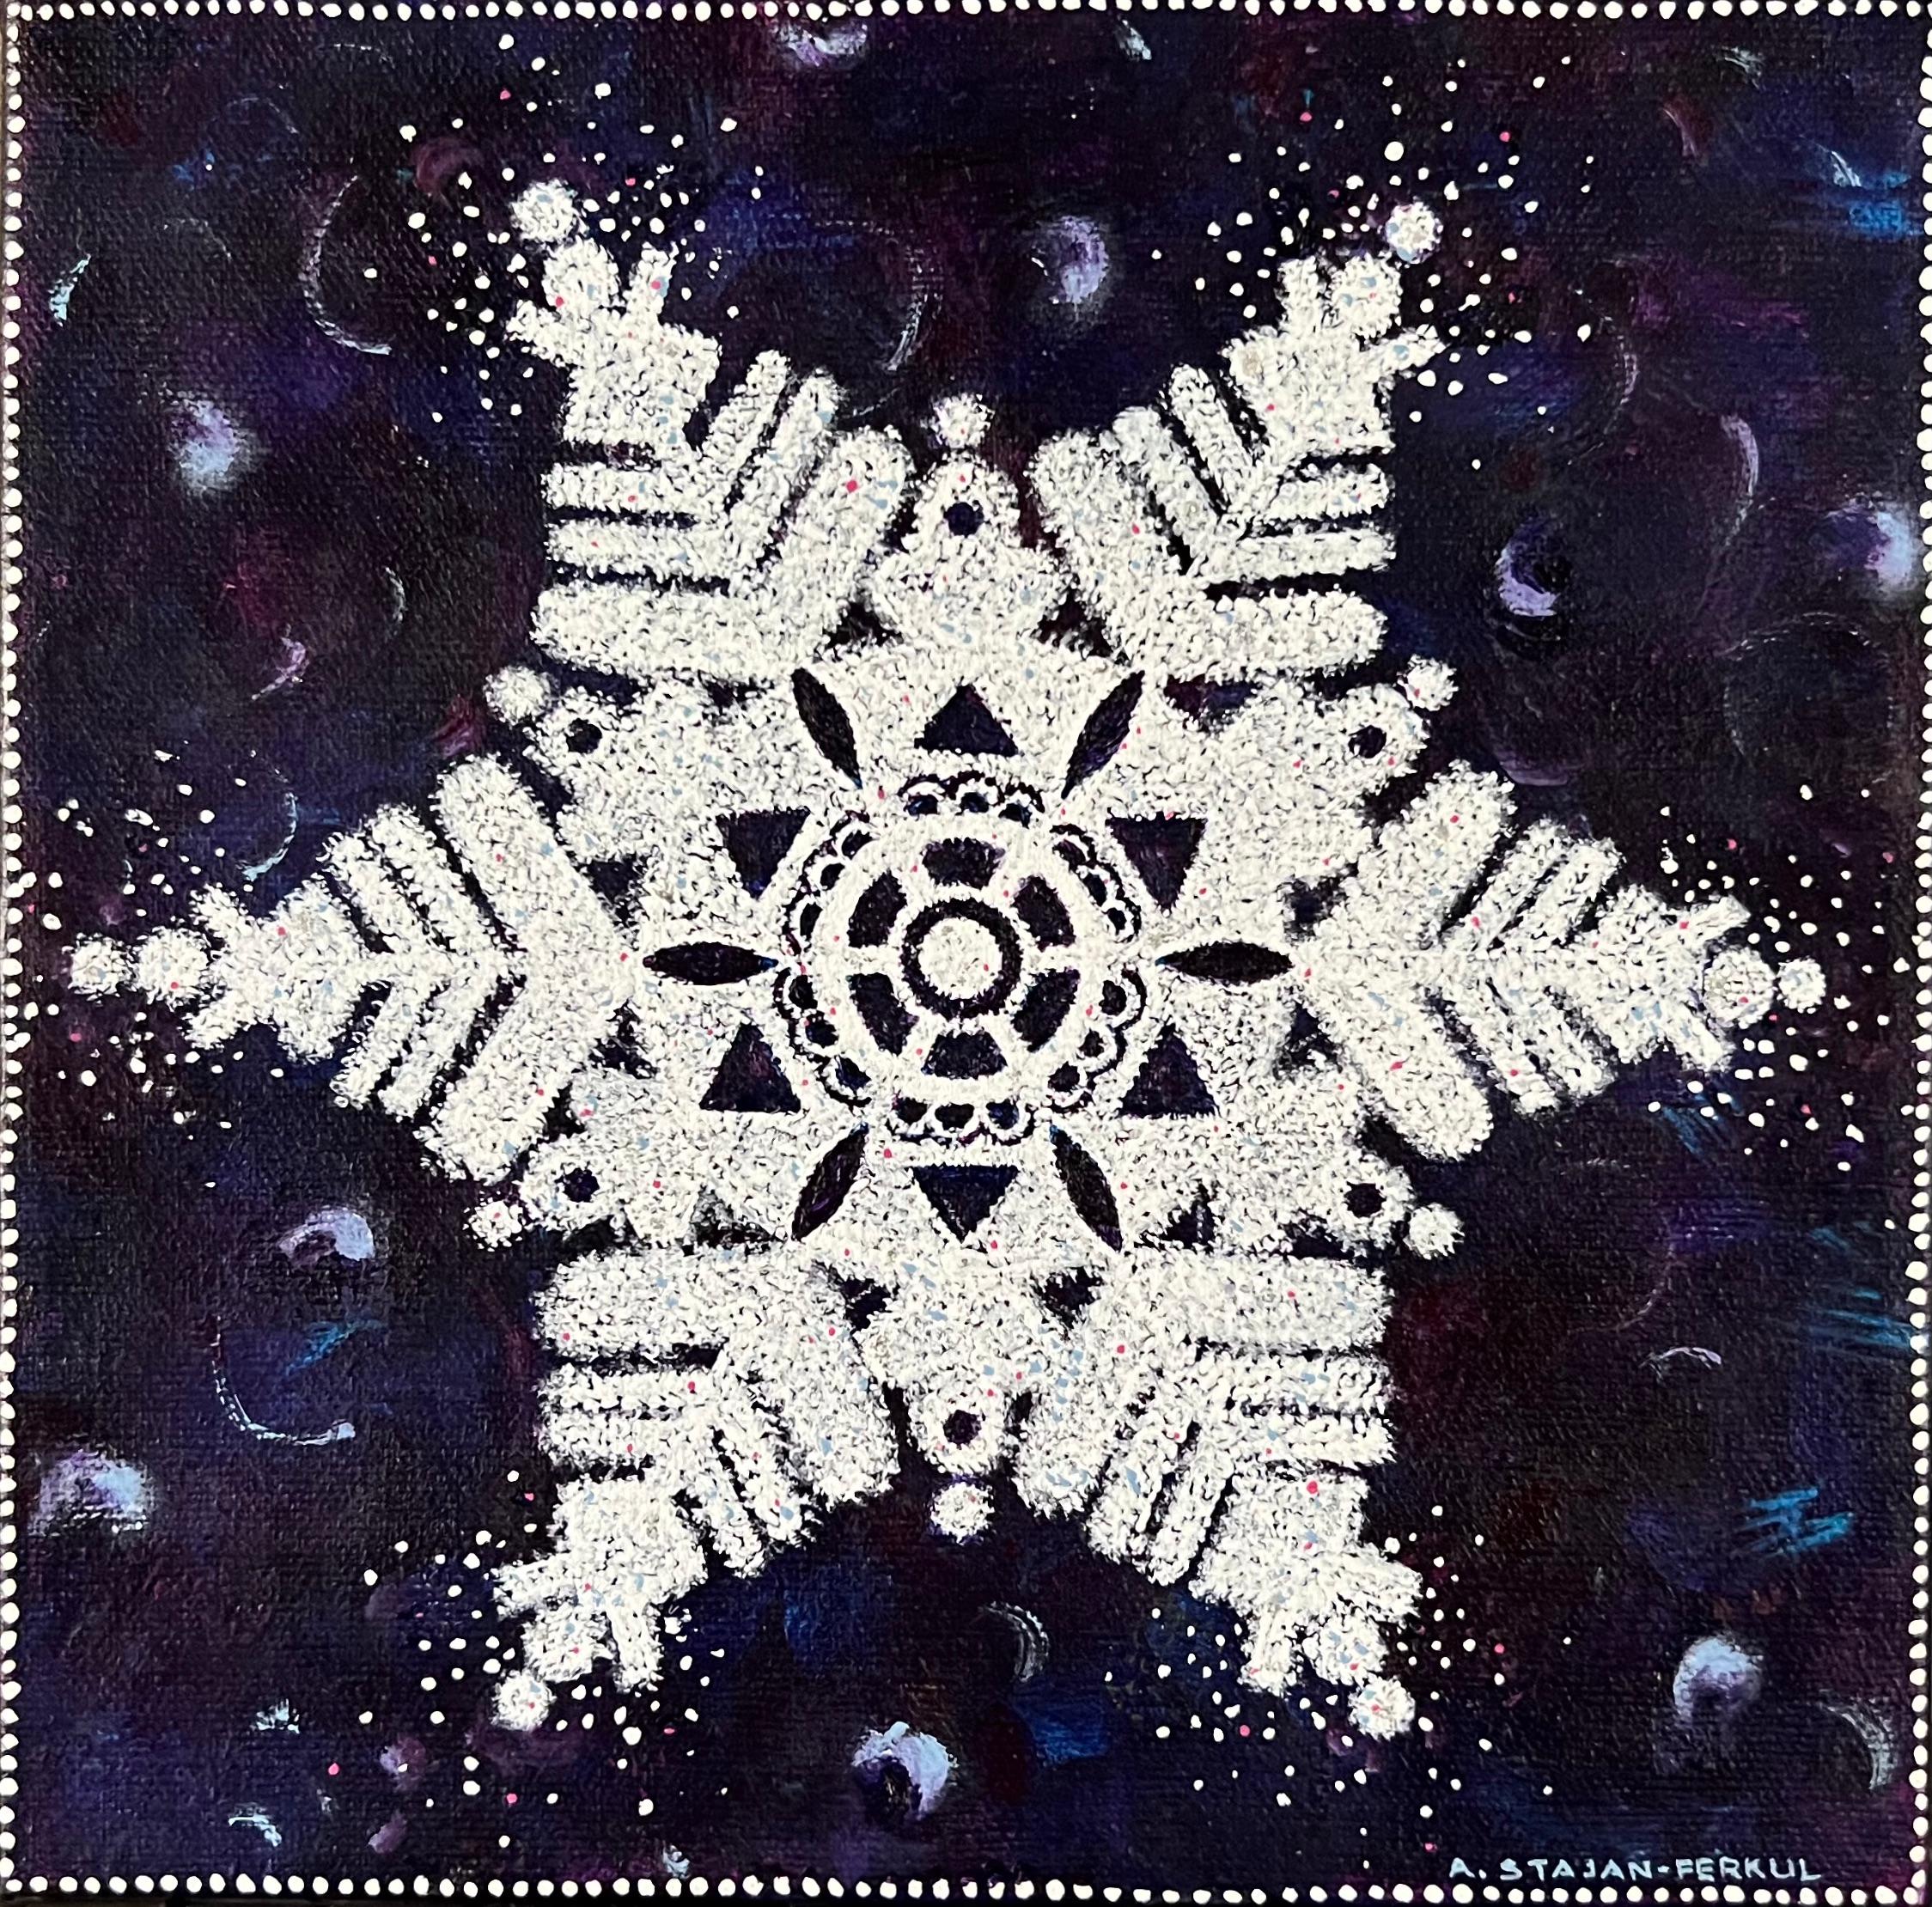 Snowflake In The Sky, 8"x8", Blue, White, Winter, Snow, Star, Christmas Painting